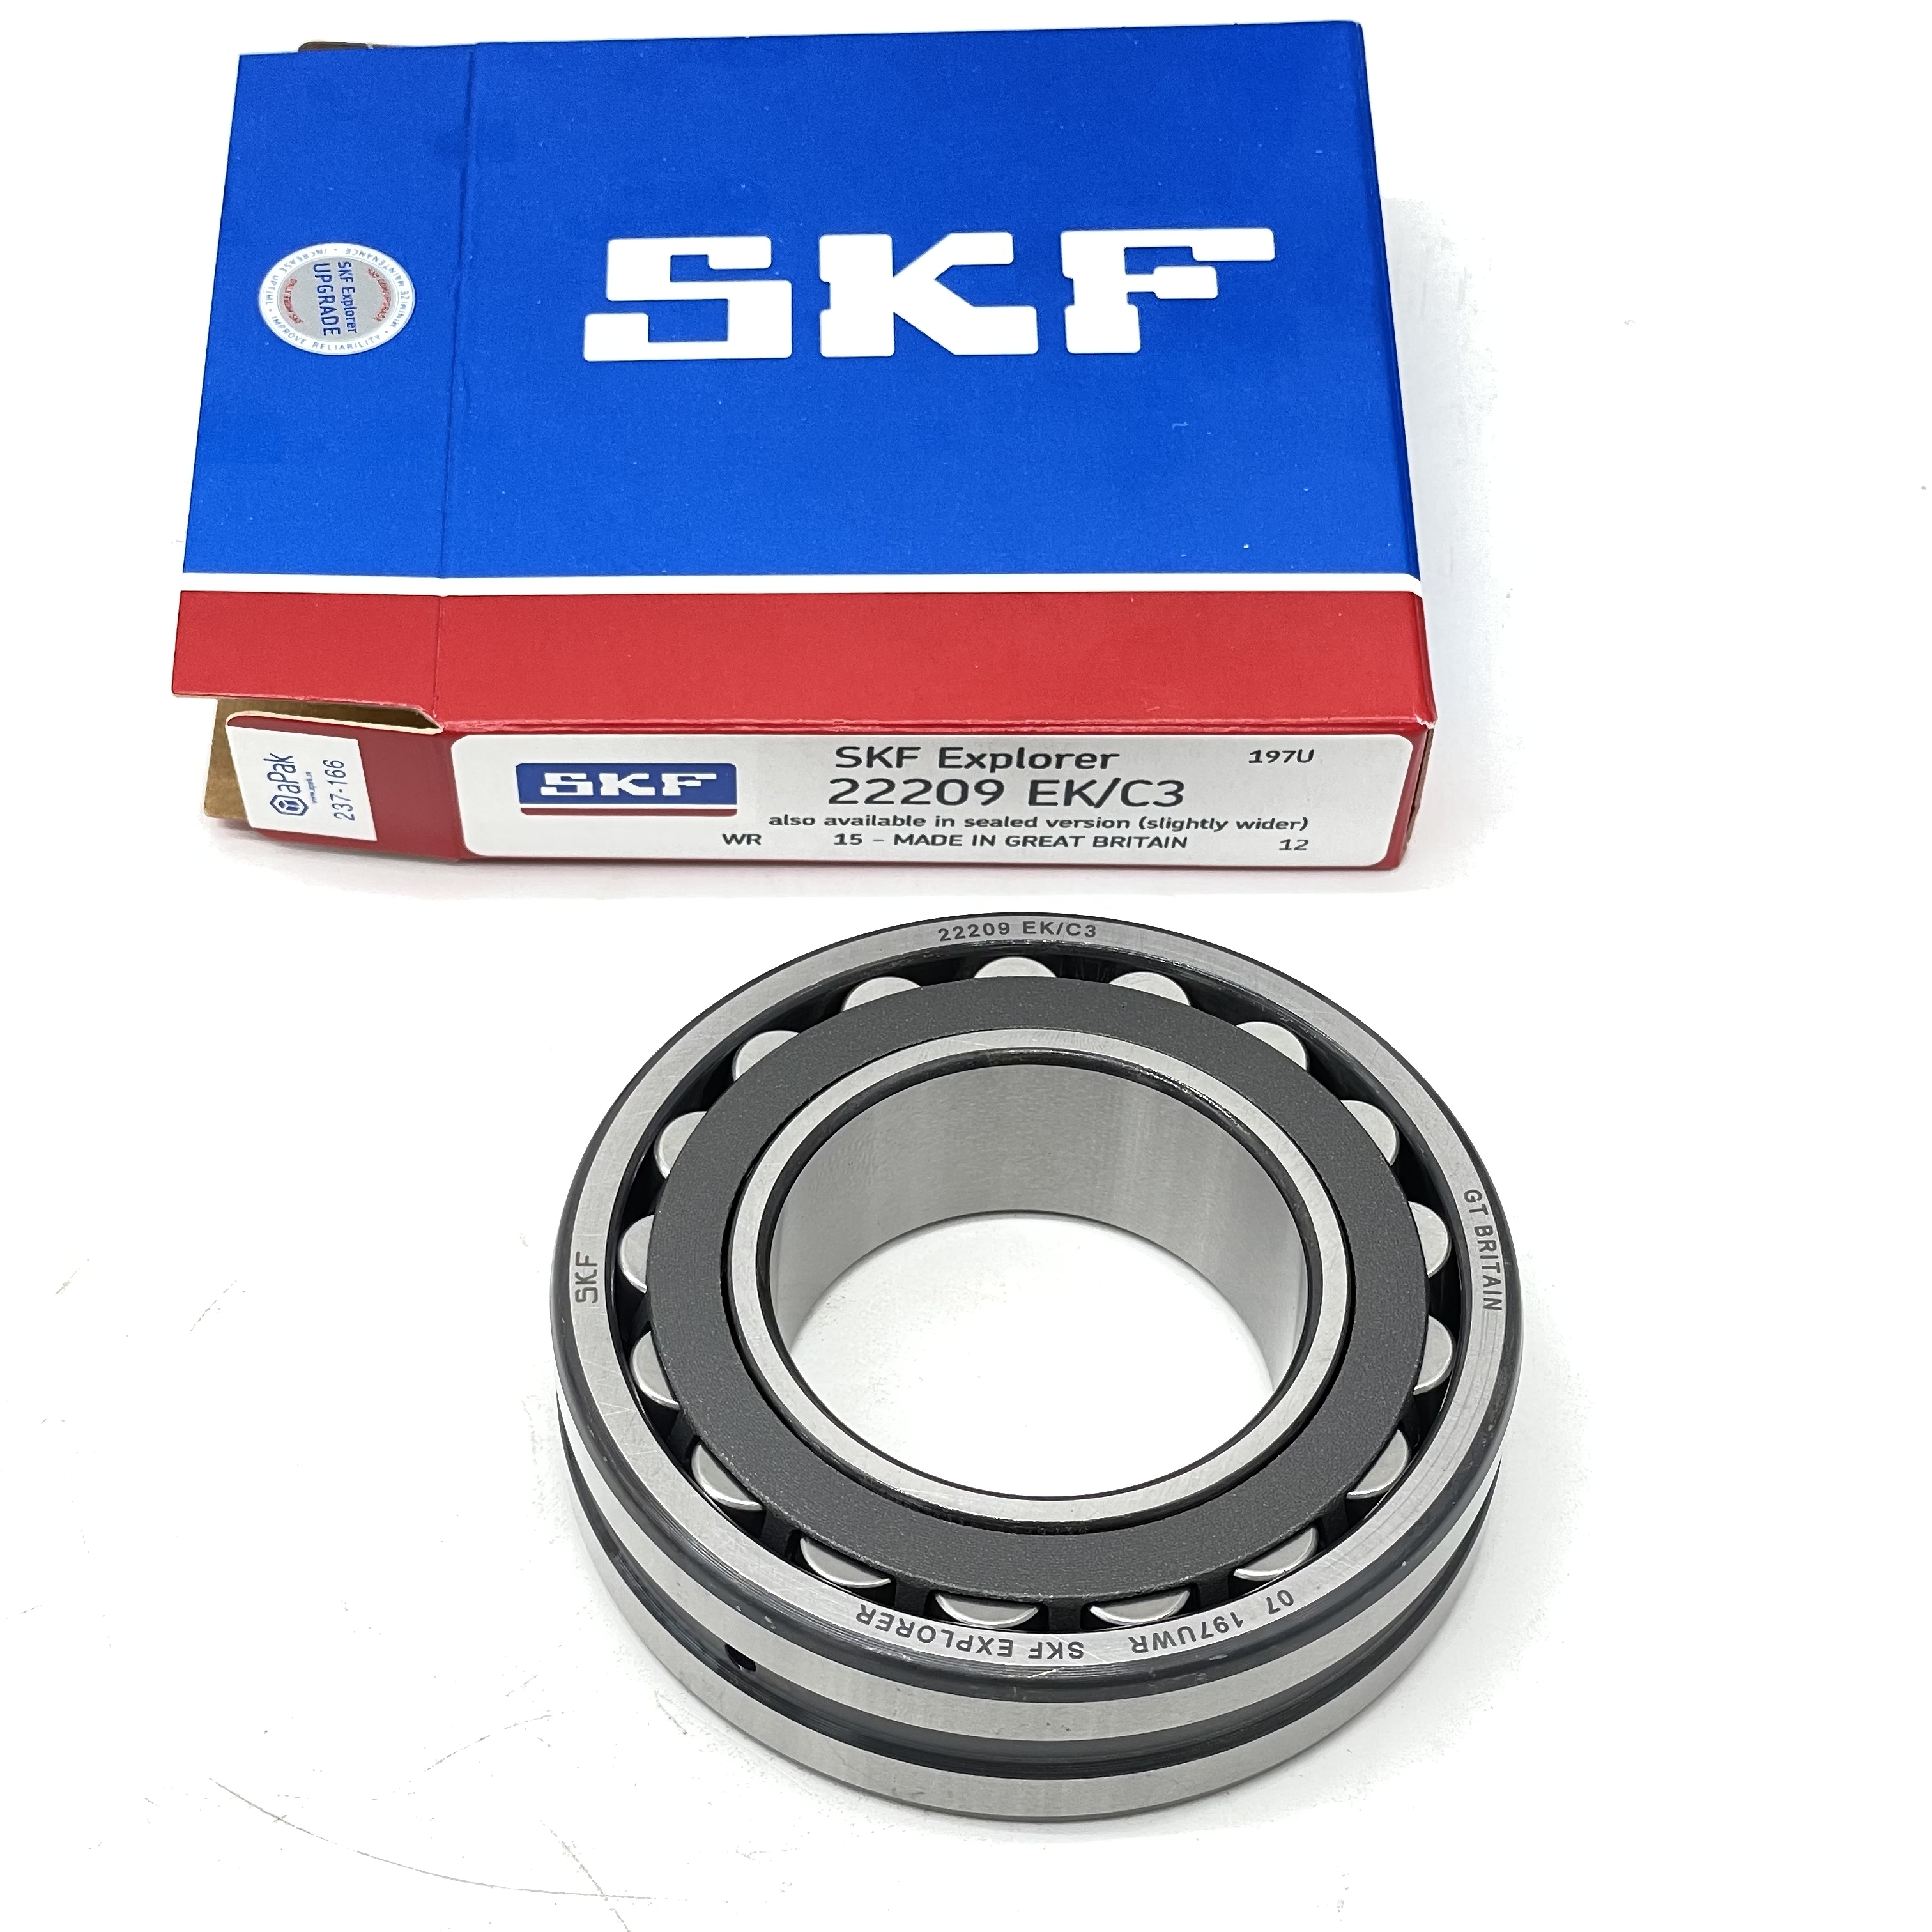 SKF self-aligning roller bearing 22209E-22216E industrial tapered roller bearing supplied by the manufacturer